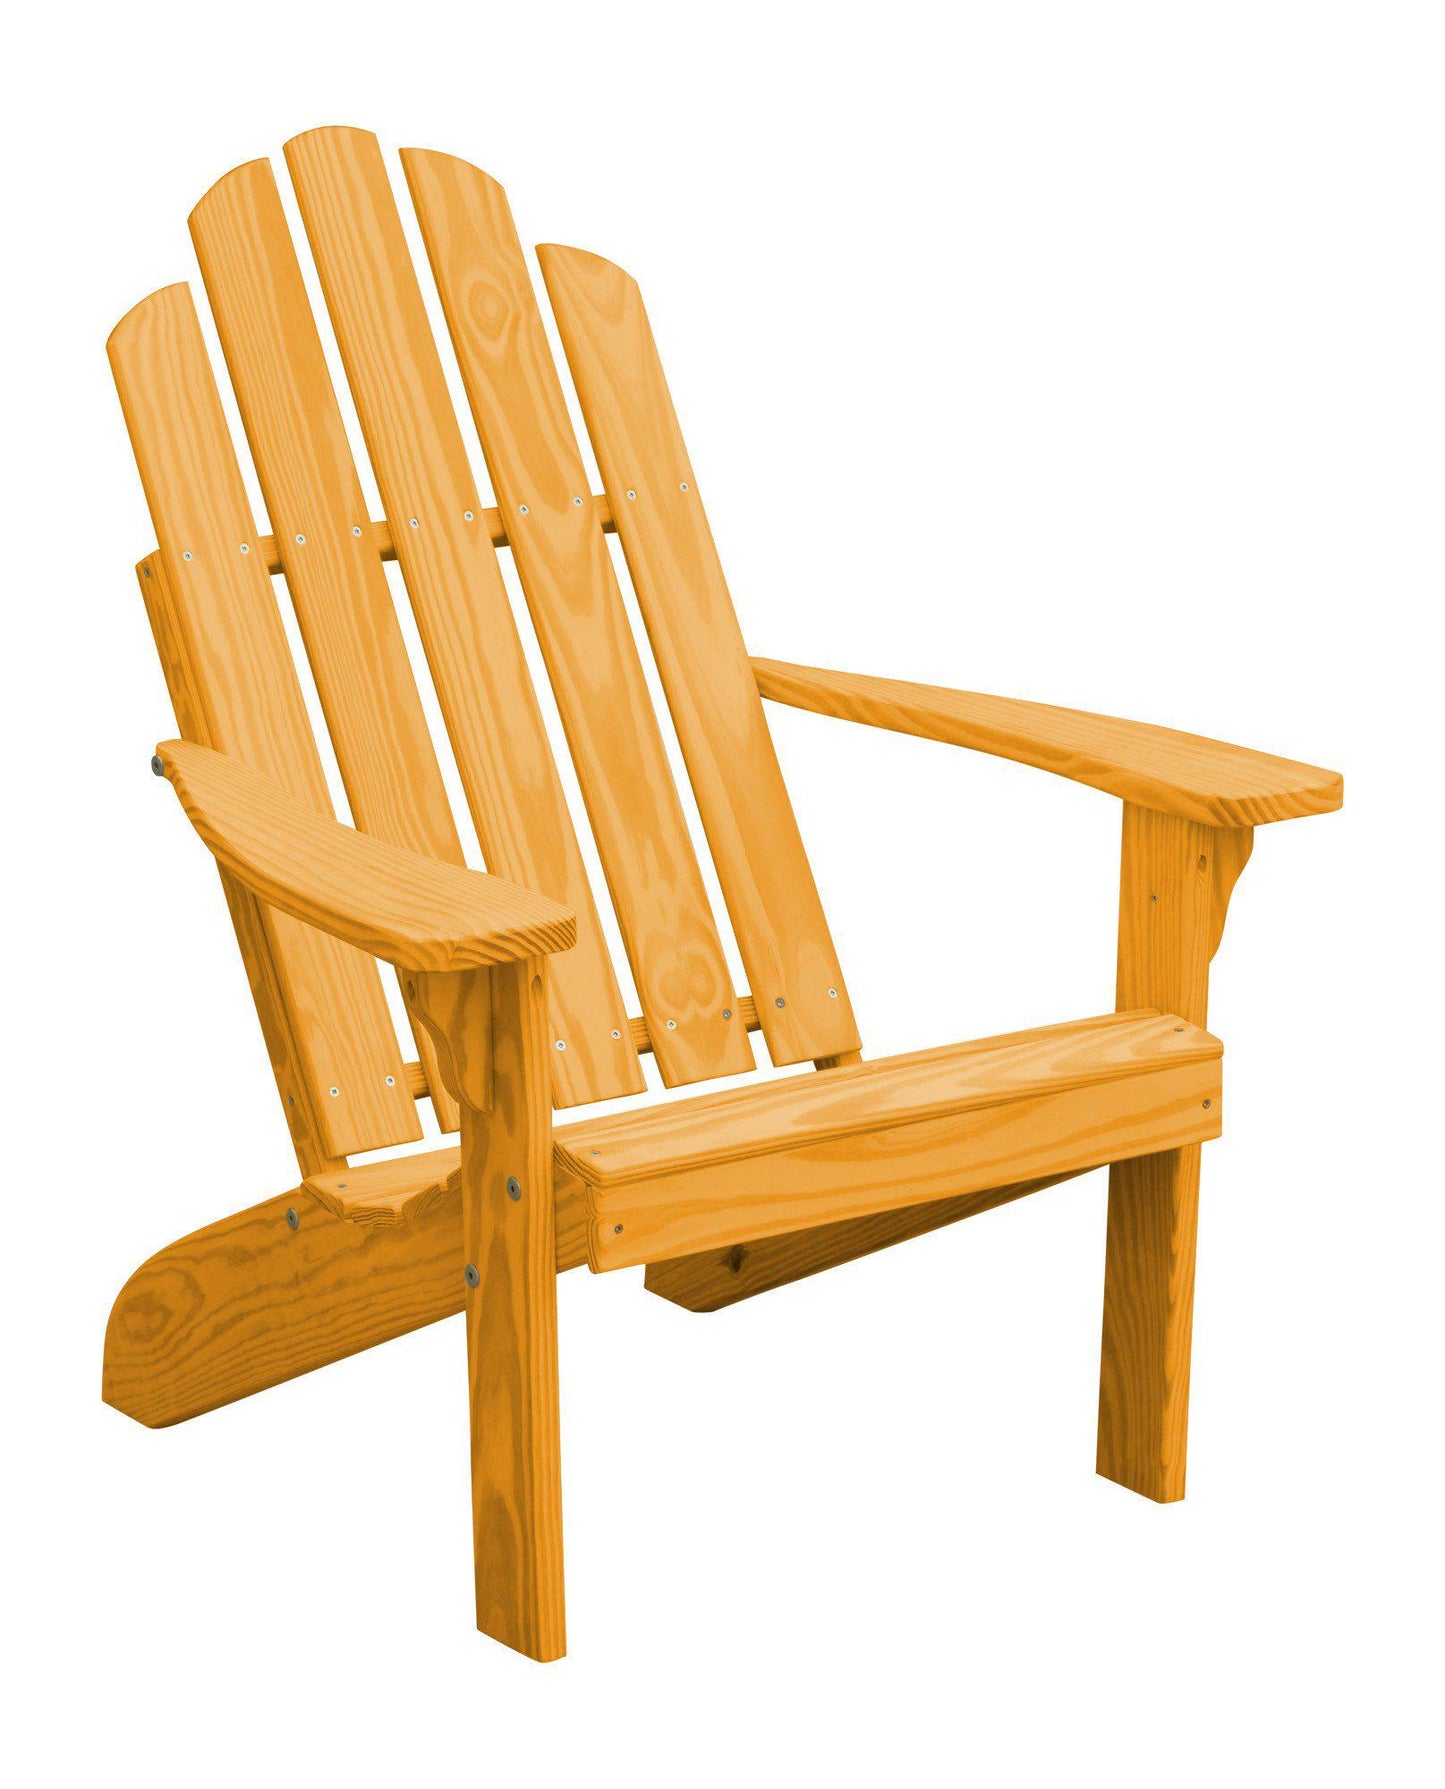 A&L Furniture Co. Yellow Pine Kennebunkport Adirondack Chair - LEAD TIME TO SHIP 10 BUSINESS DAYS